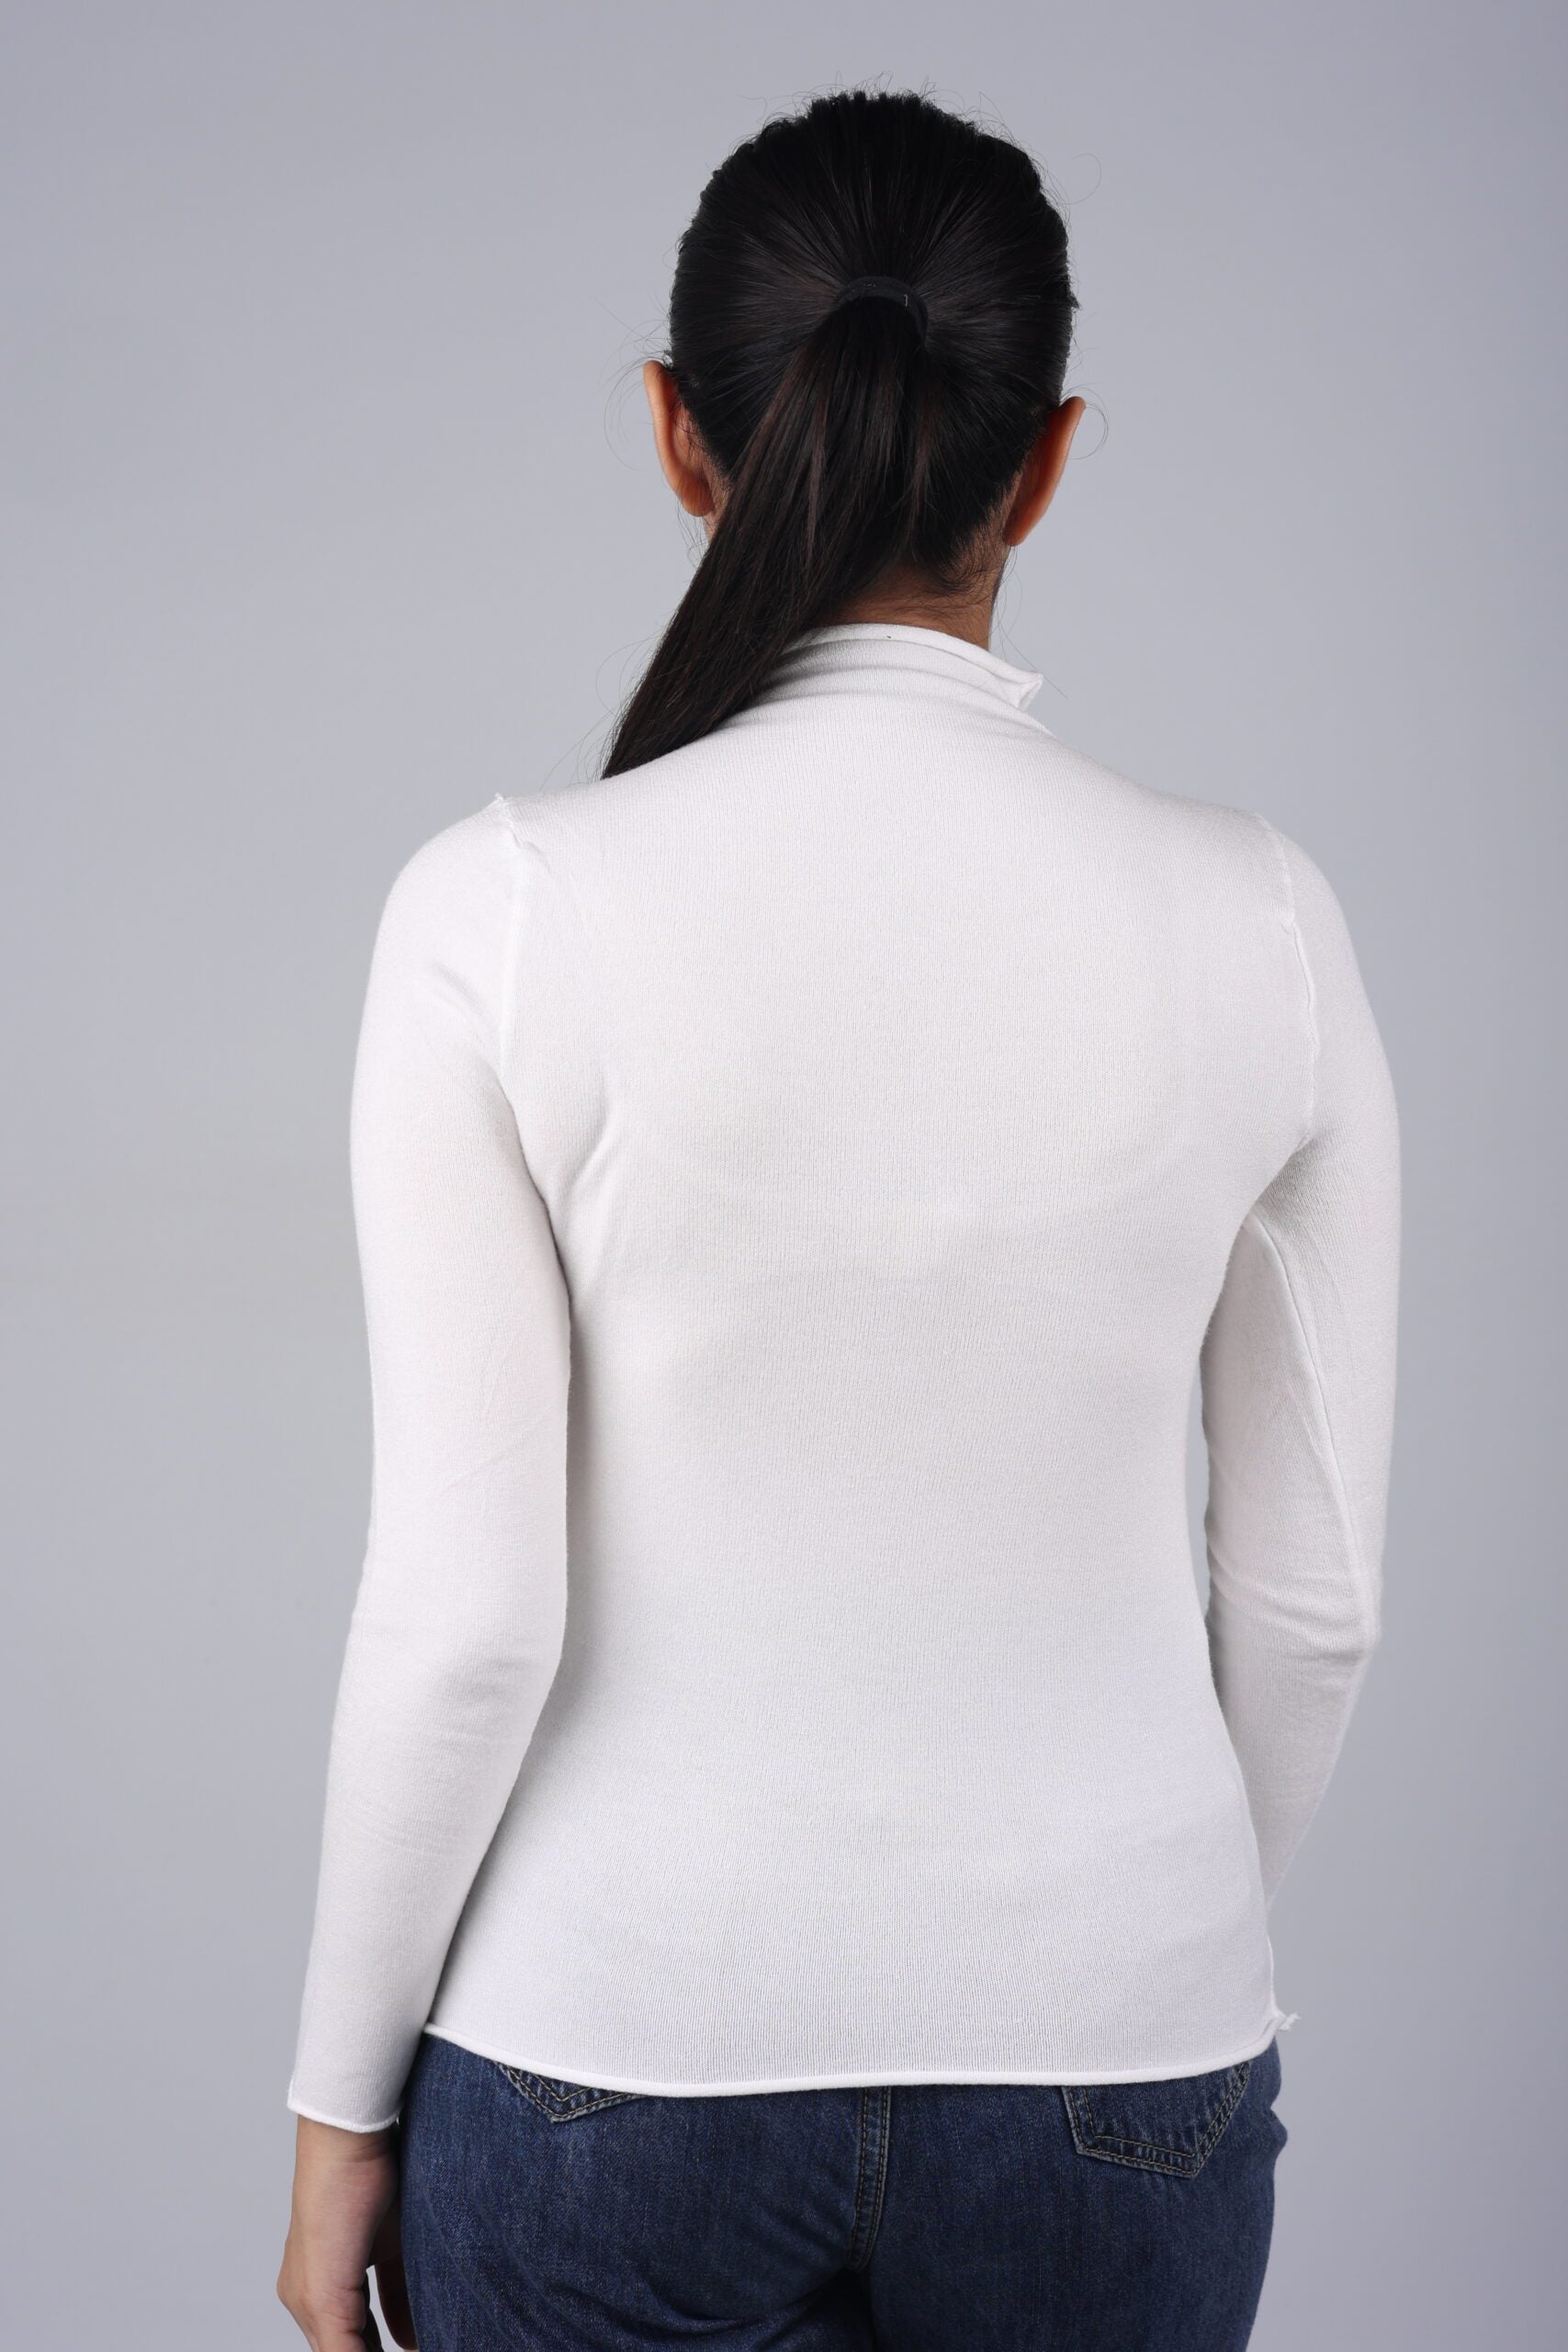 T-neck Basic Knitted Top (White) A Timeless Wardrobe Essential for Effortless Style and Comfort!